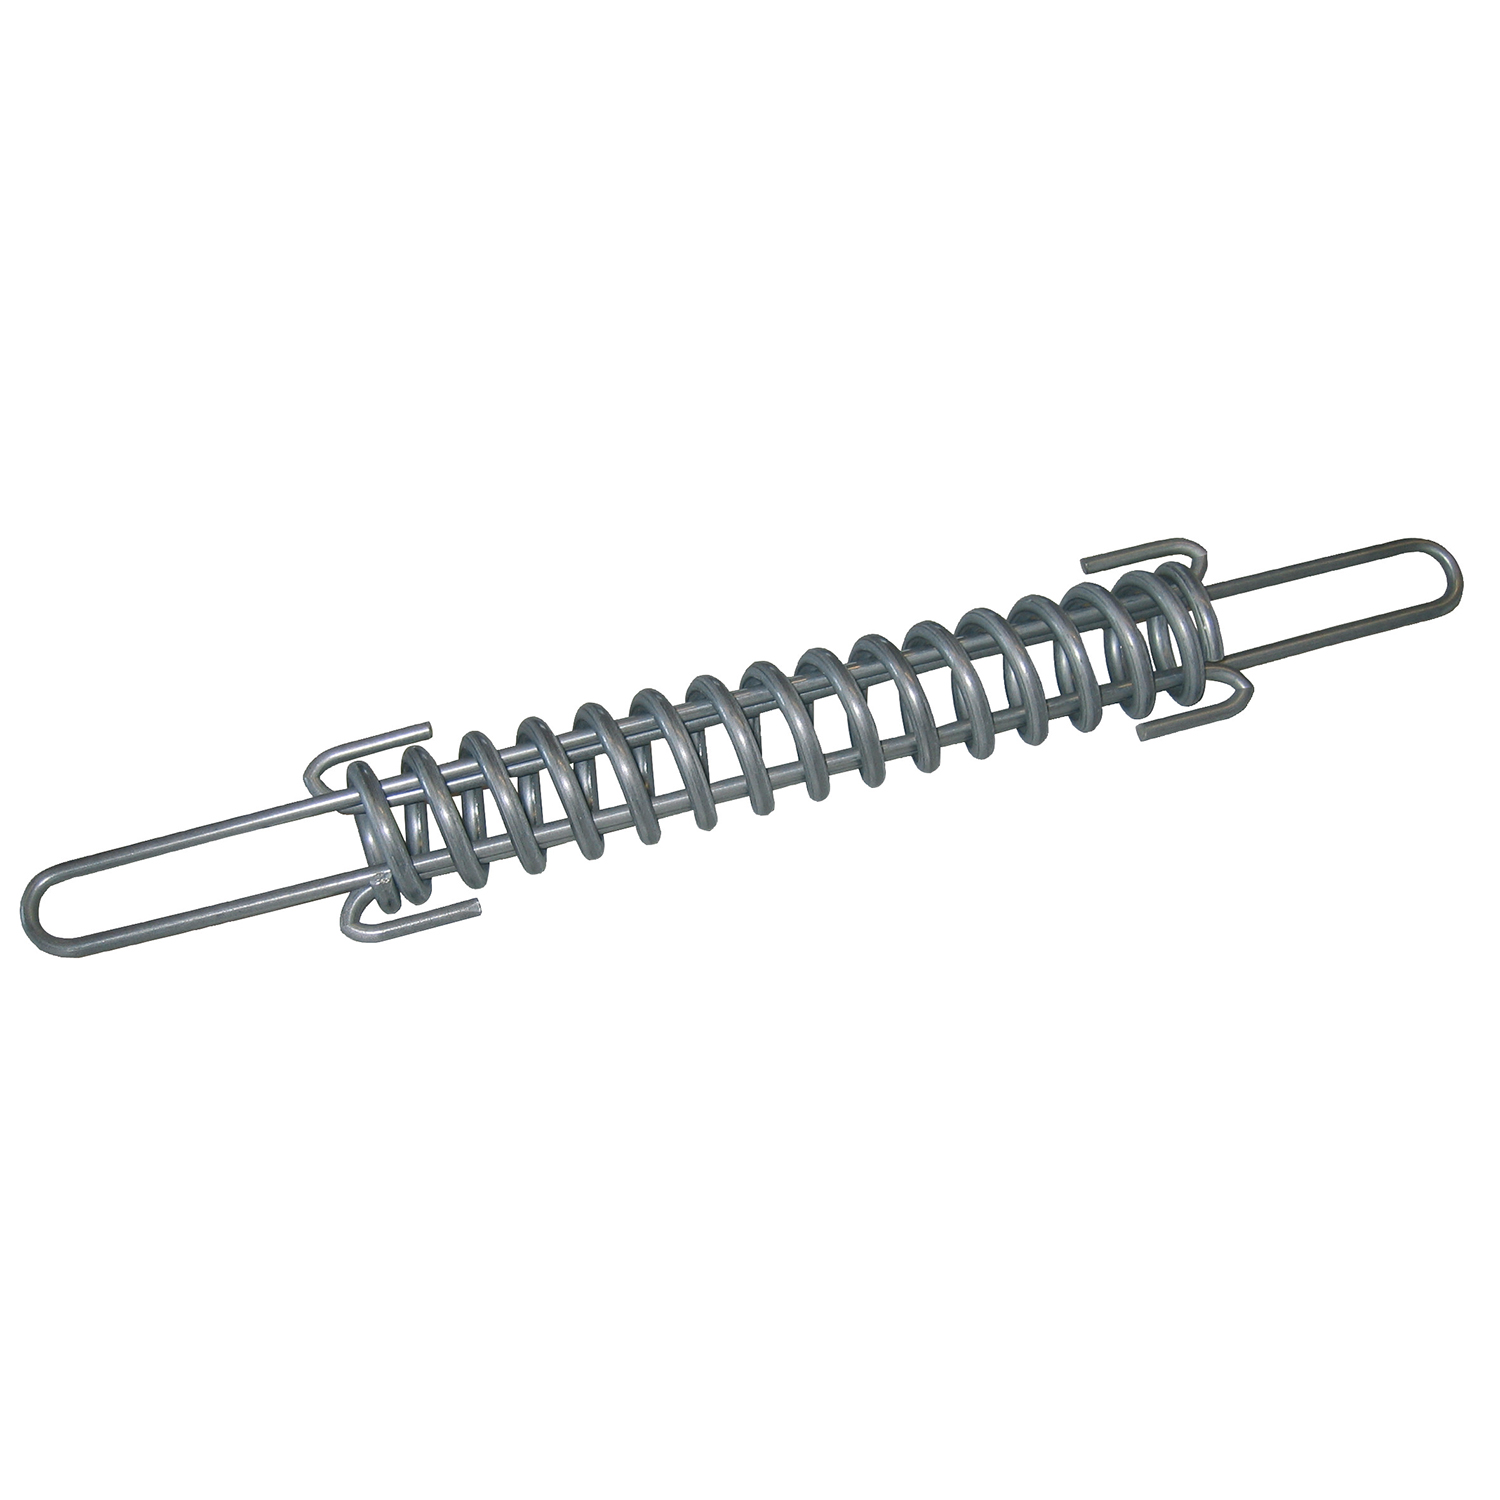 CORRAL TENSION SPRING STAINLESS STEEL